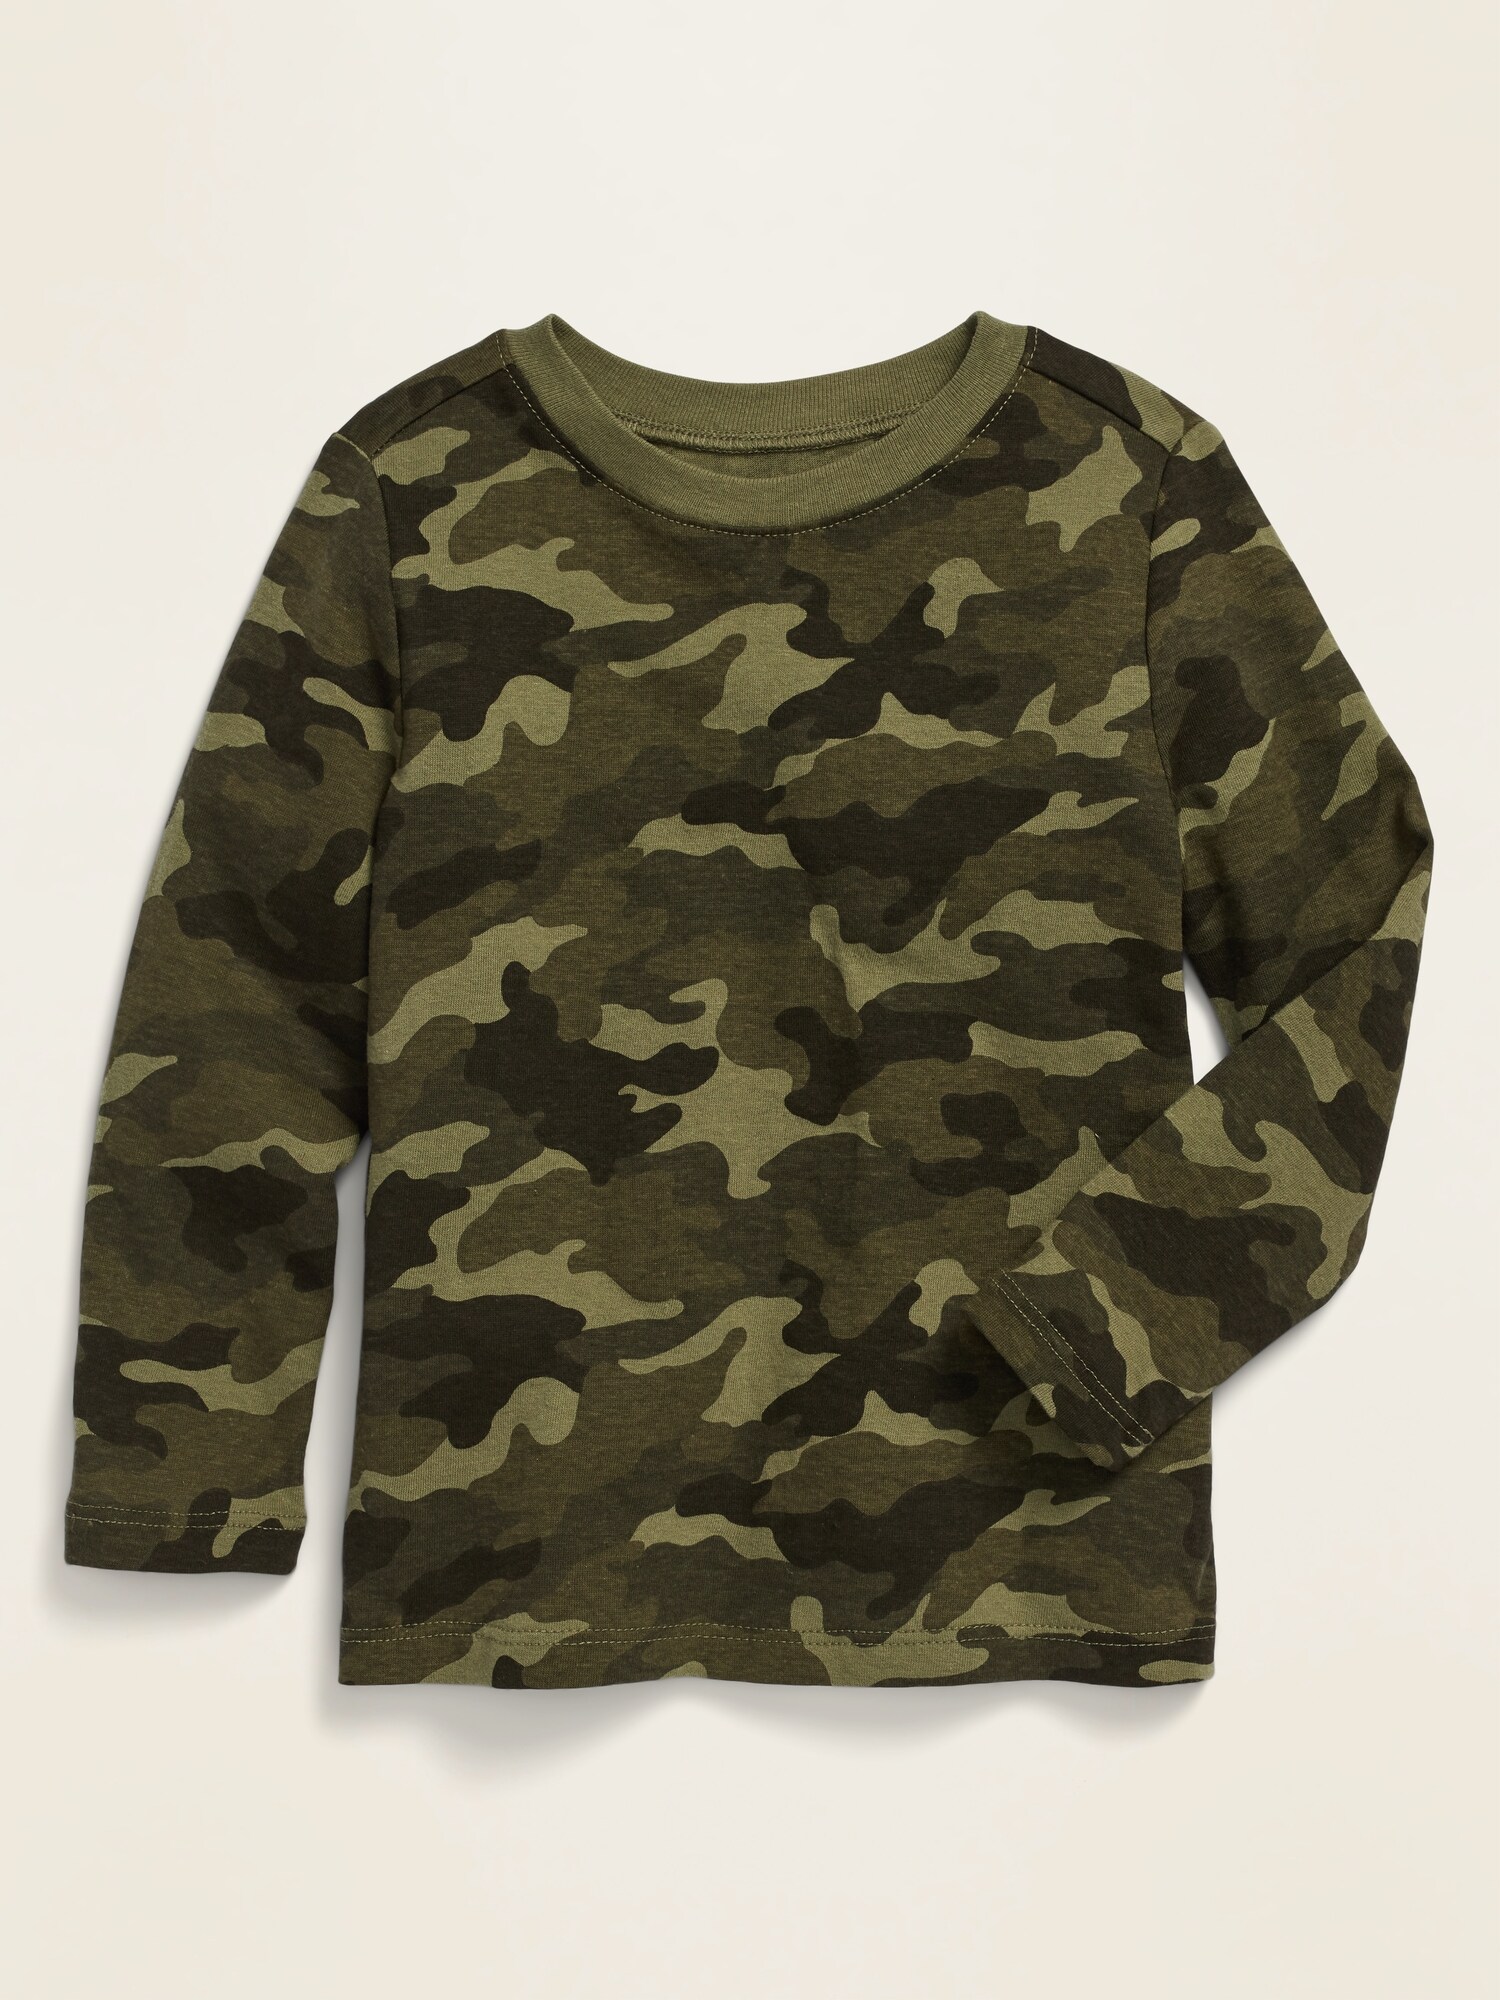 *Hot Deal* Printed Long-Sleeve Crew-Neck Tee for Toddler Boys